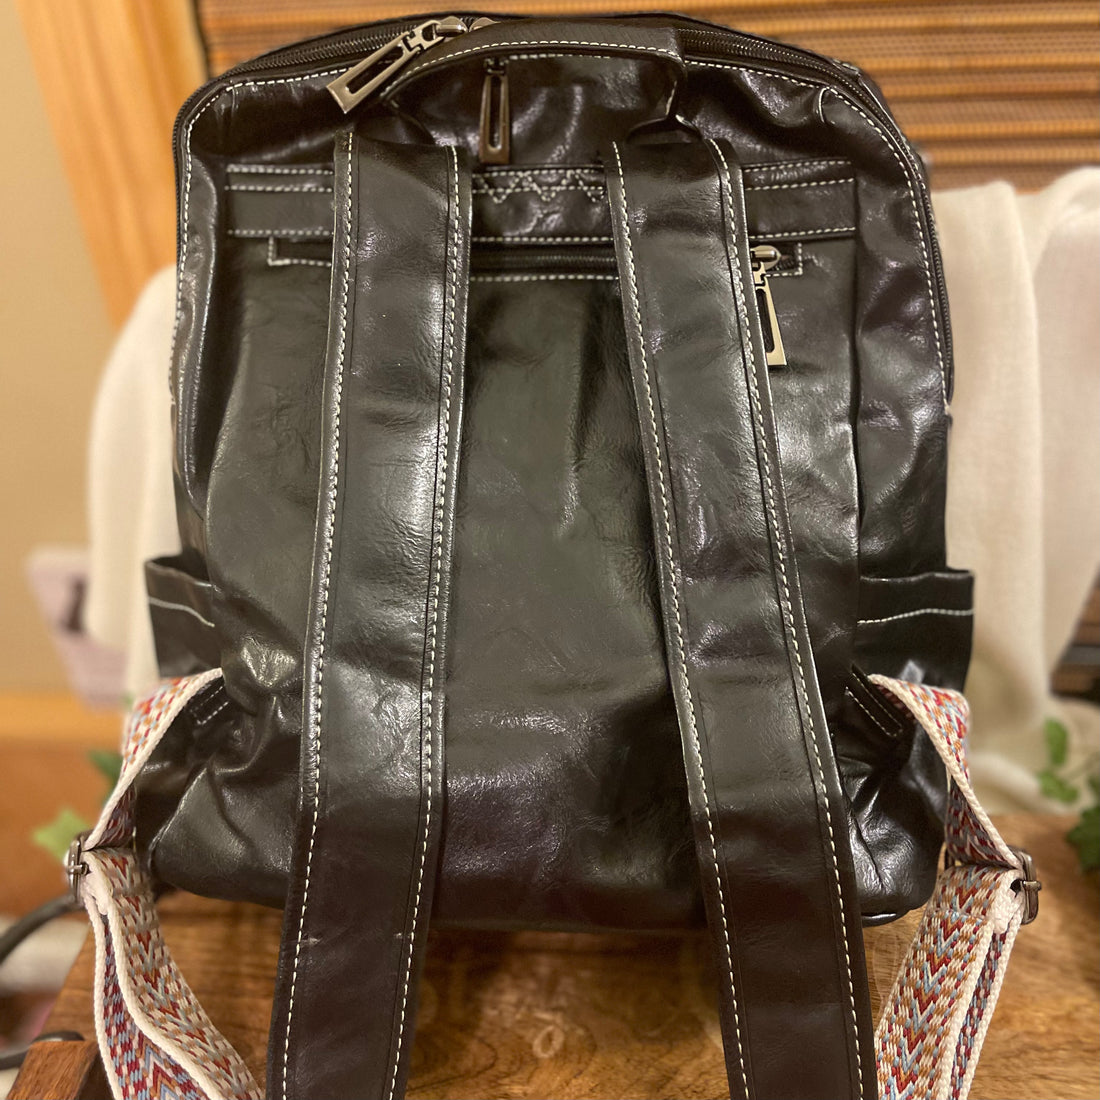 Vegan Leather Backpack Tote Bag With Leather Tassel Zippers and Detachable Strap Plus Bonus Strap